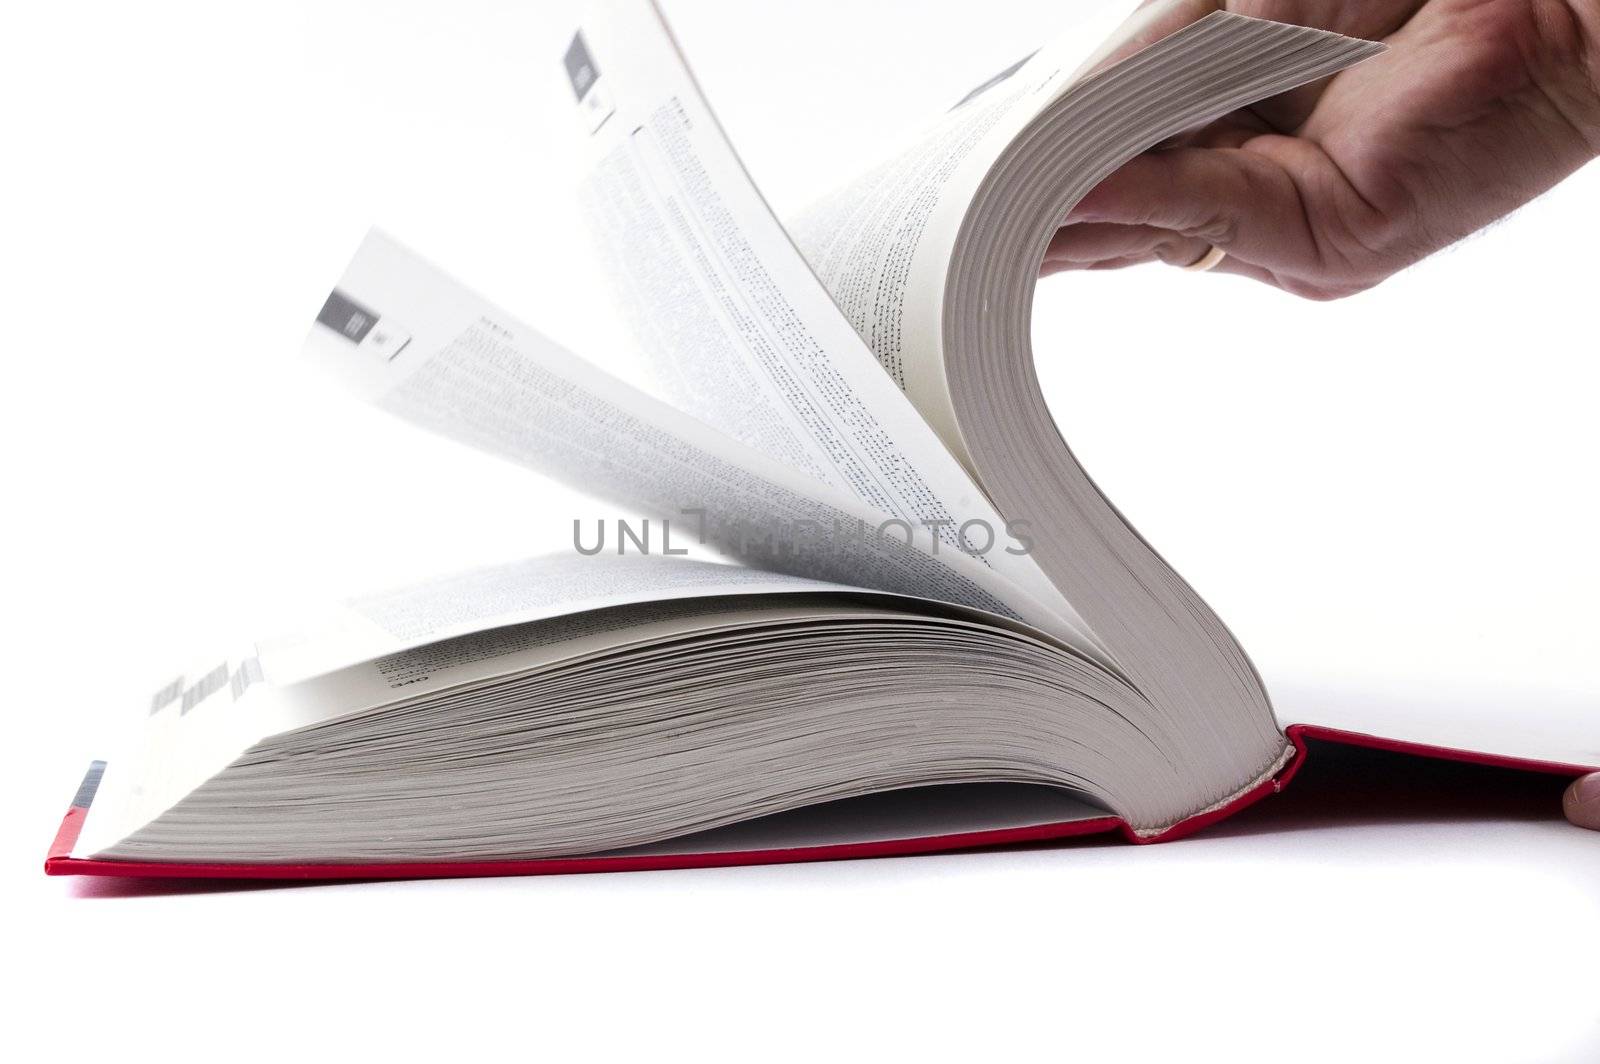 Turning pages of an empty white hardcover book by Triphka